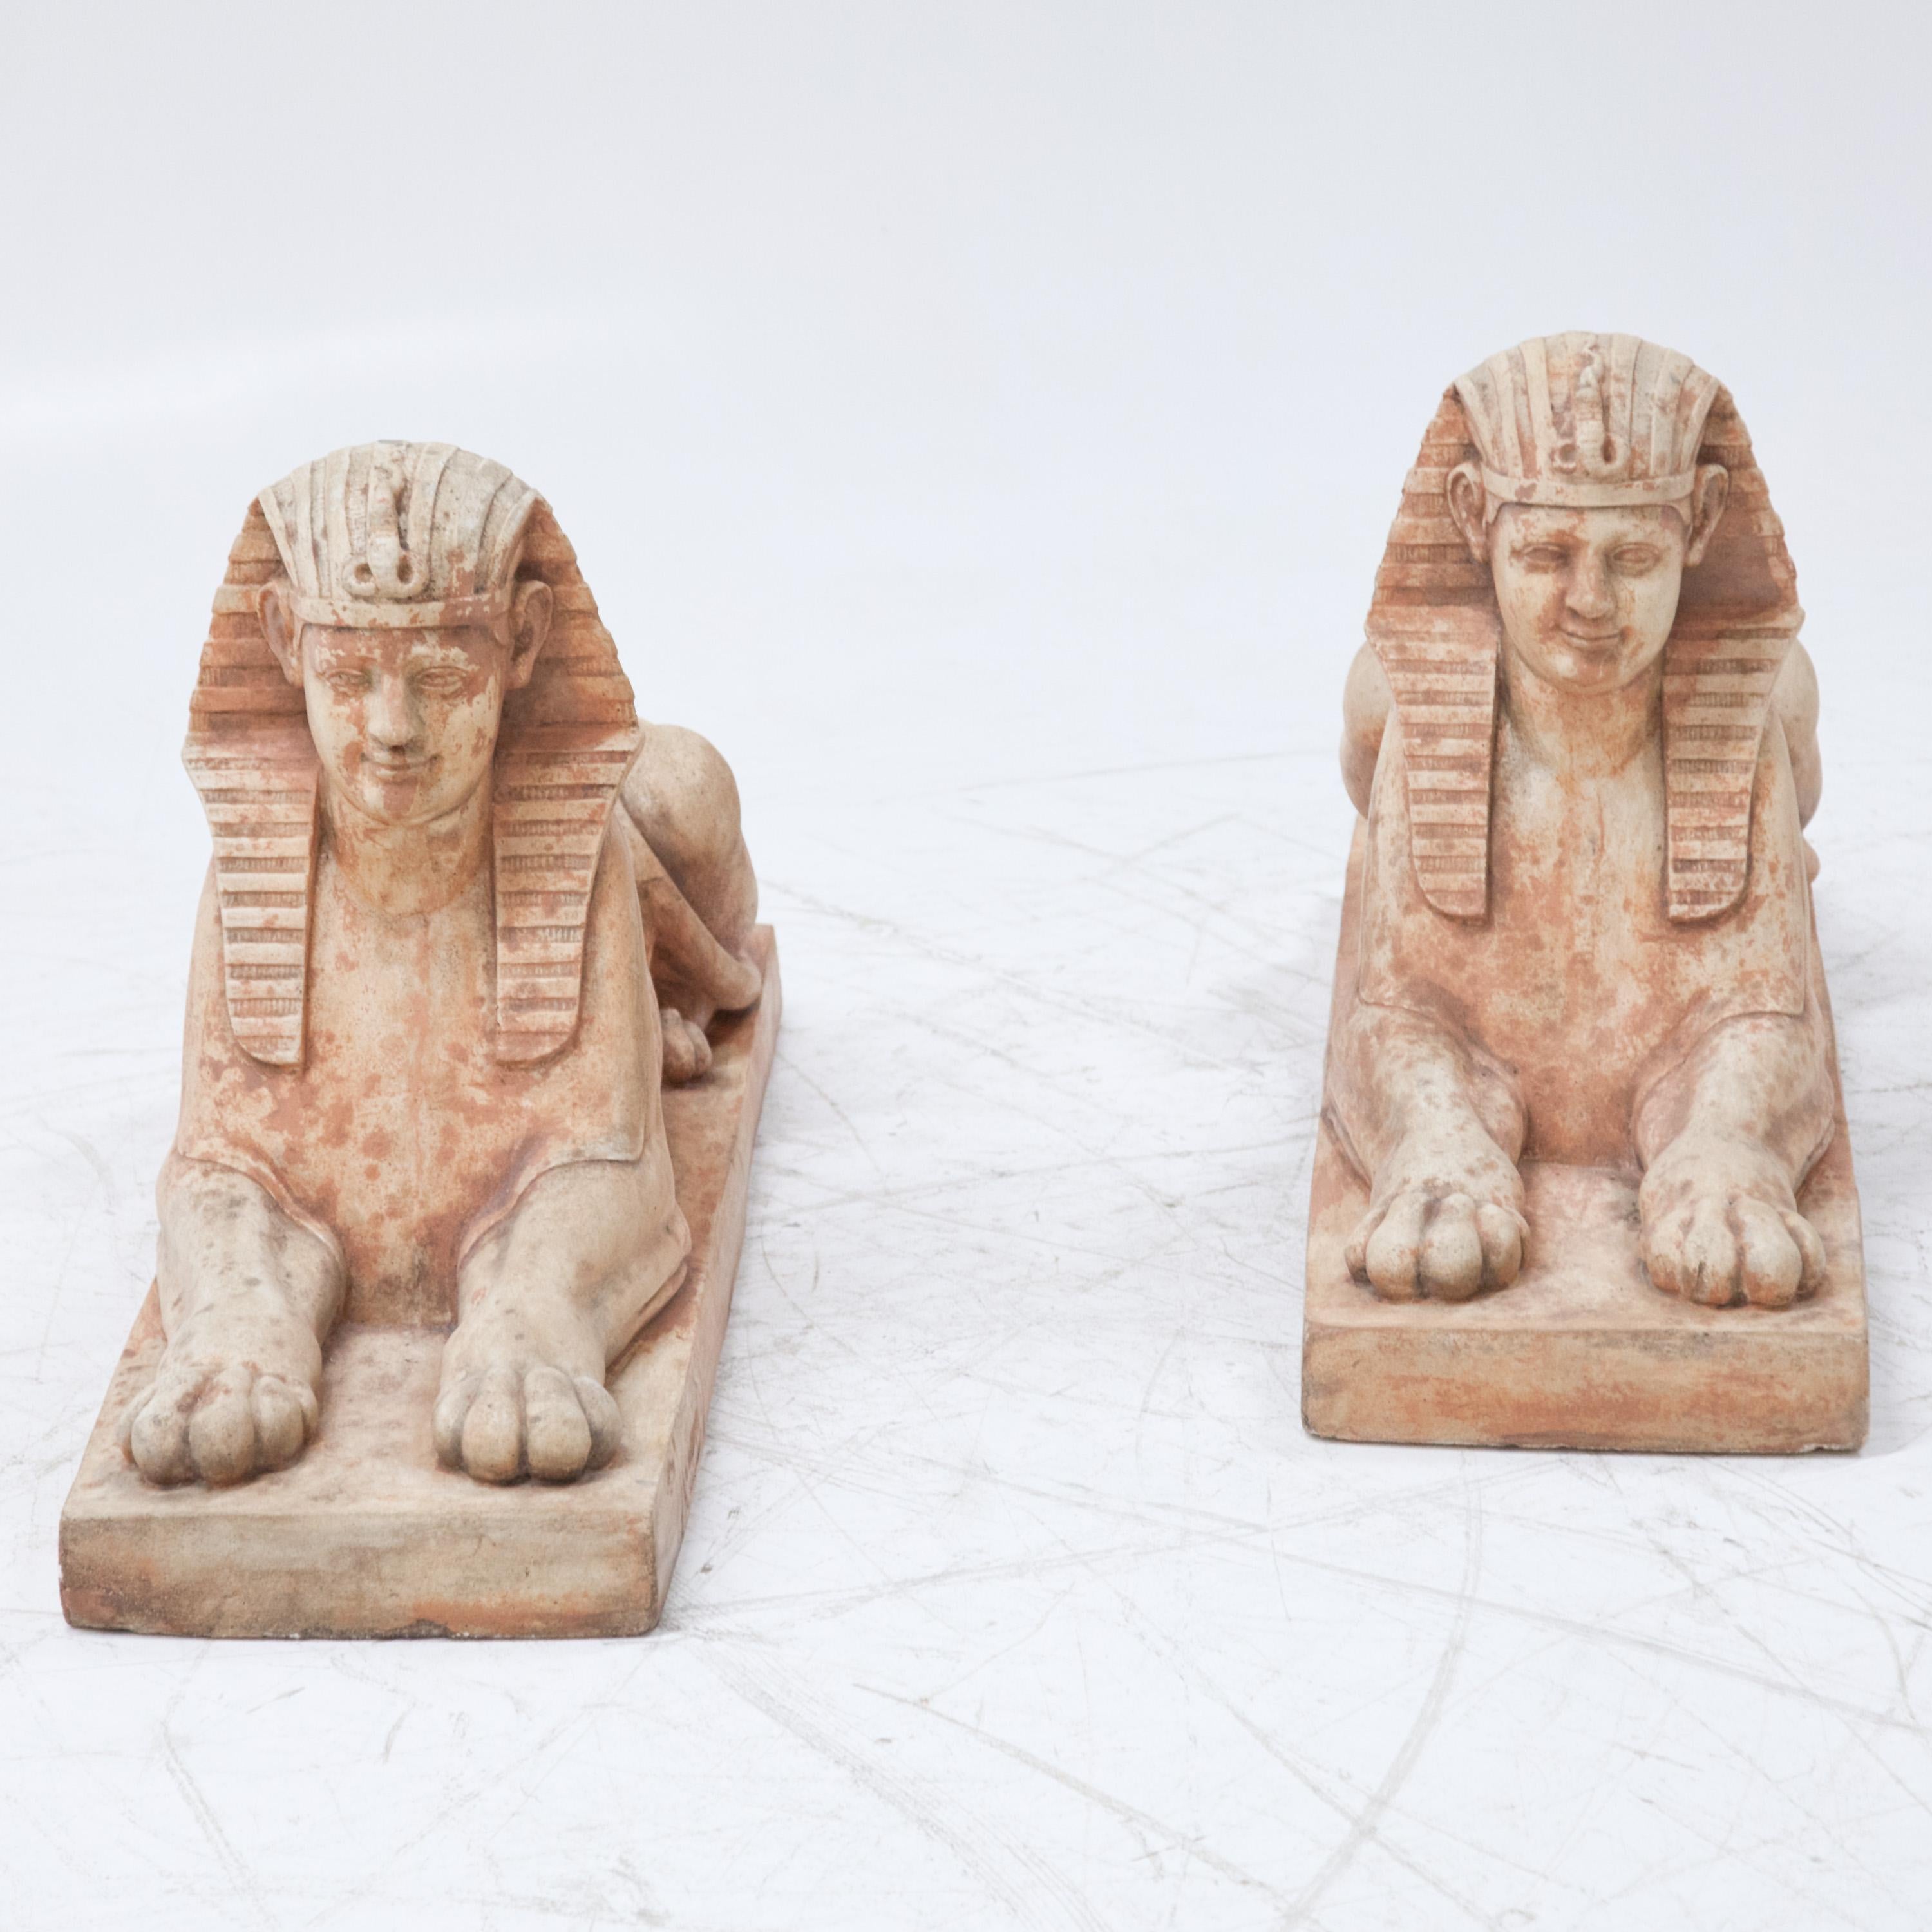 European Terracotta Sphinxes, Second Half of the 20th Century